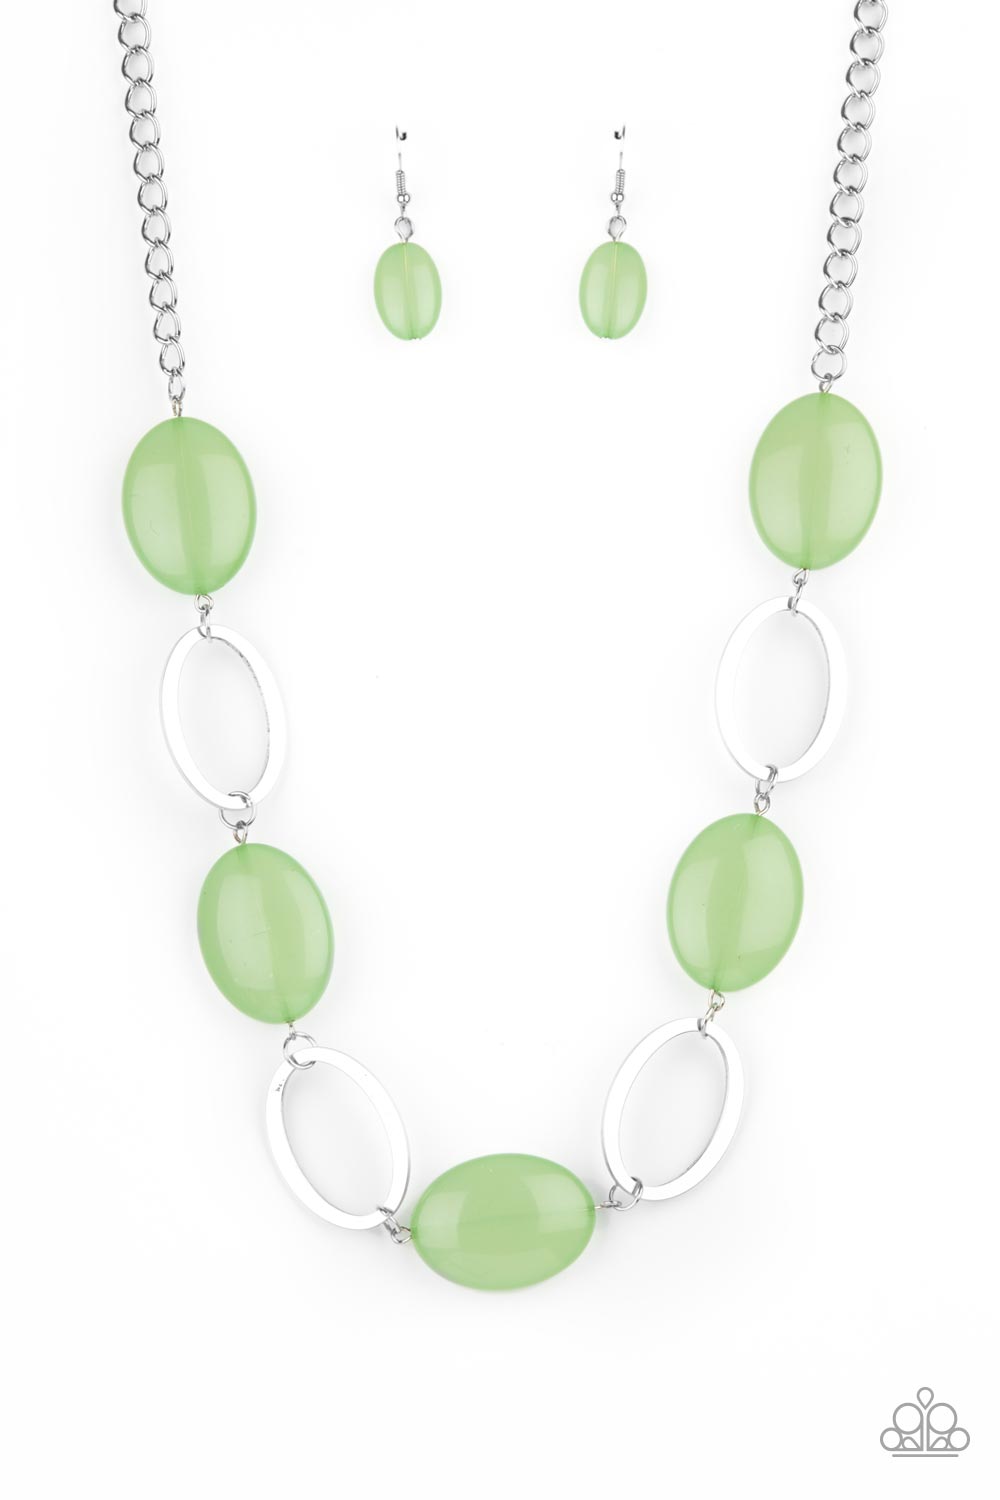 Beachside Boardwalk Green Necklace - Paparazzi Accessories  Shiny silver ovals and glassy green oval beads delicately link across the chest, creating a whimsical pop of color. Features an adjustable clasp closure.  All Paparazzi Accessories are lead free and nickel free!  Sold as one individual necklace. Includes one pair of matching earrings.